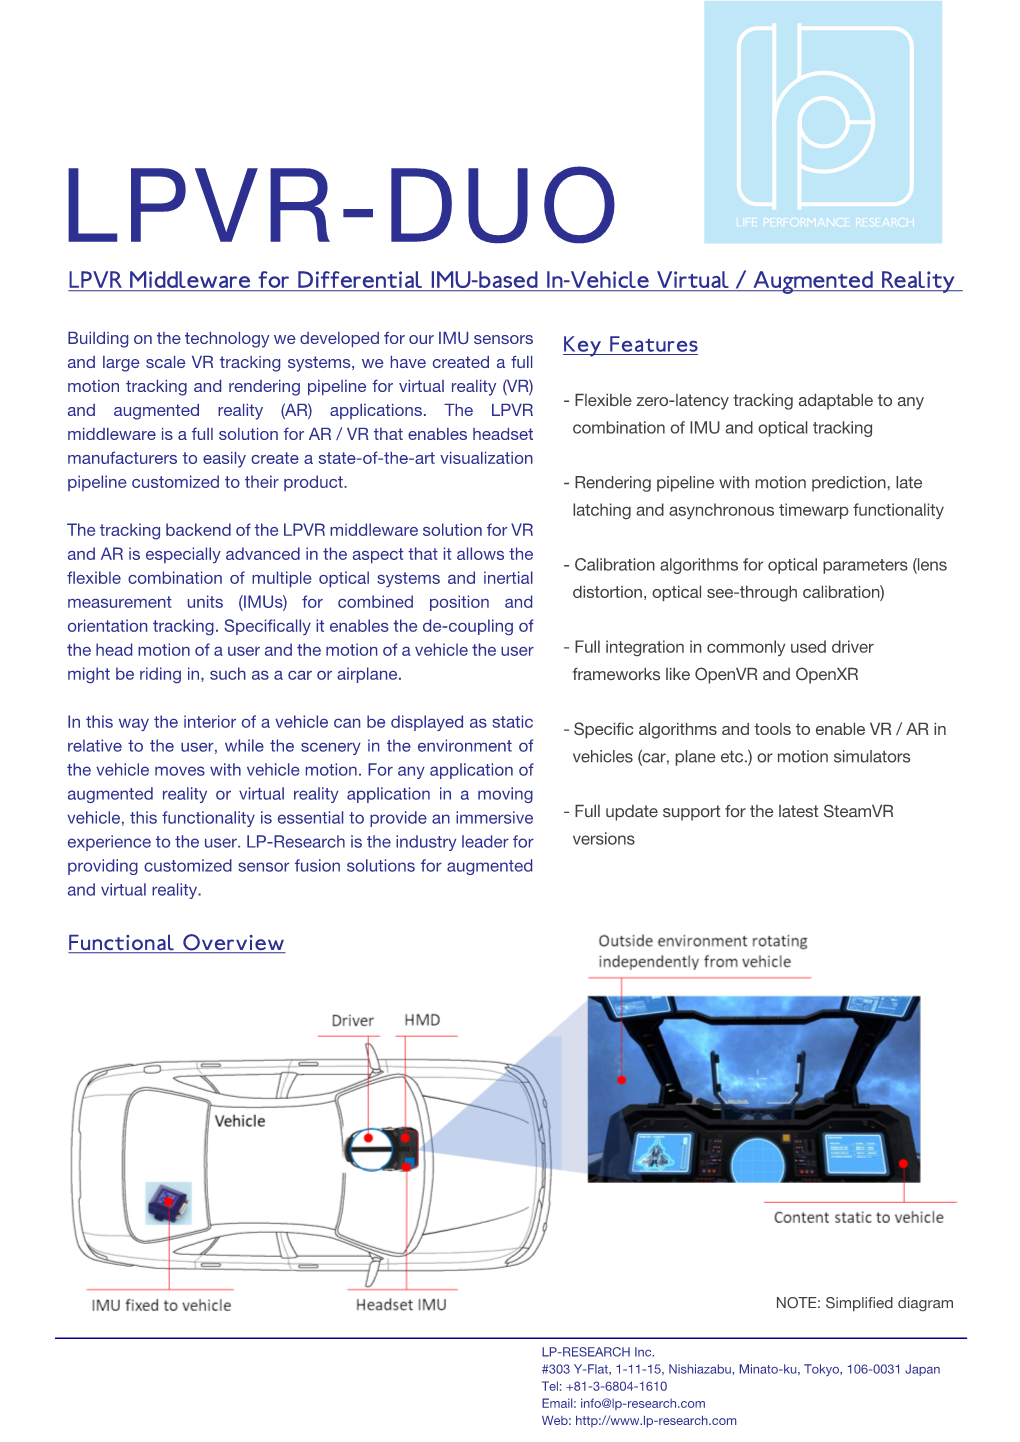 LPVR-DUO LPVR Middleware for Differential IMU-Based In-Vehicle Virtual / Augmented Reality